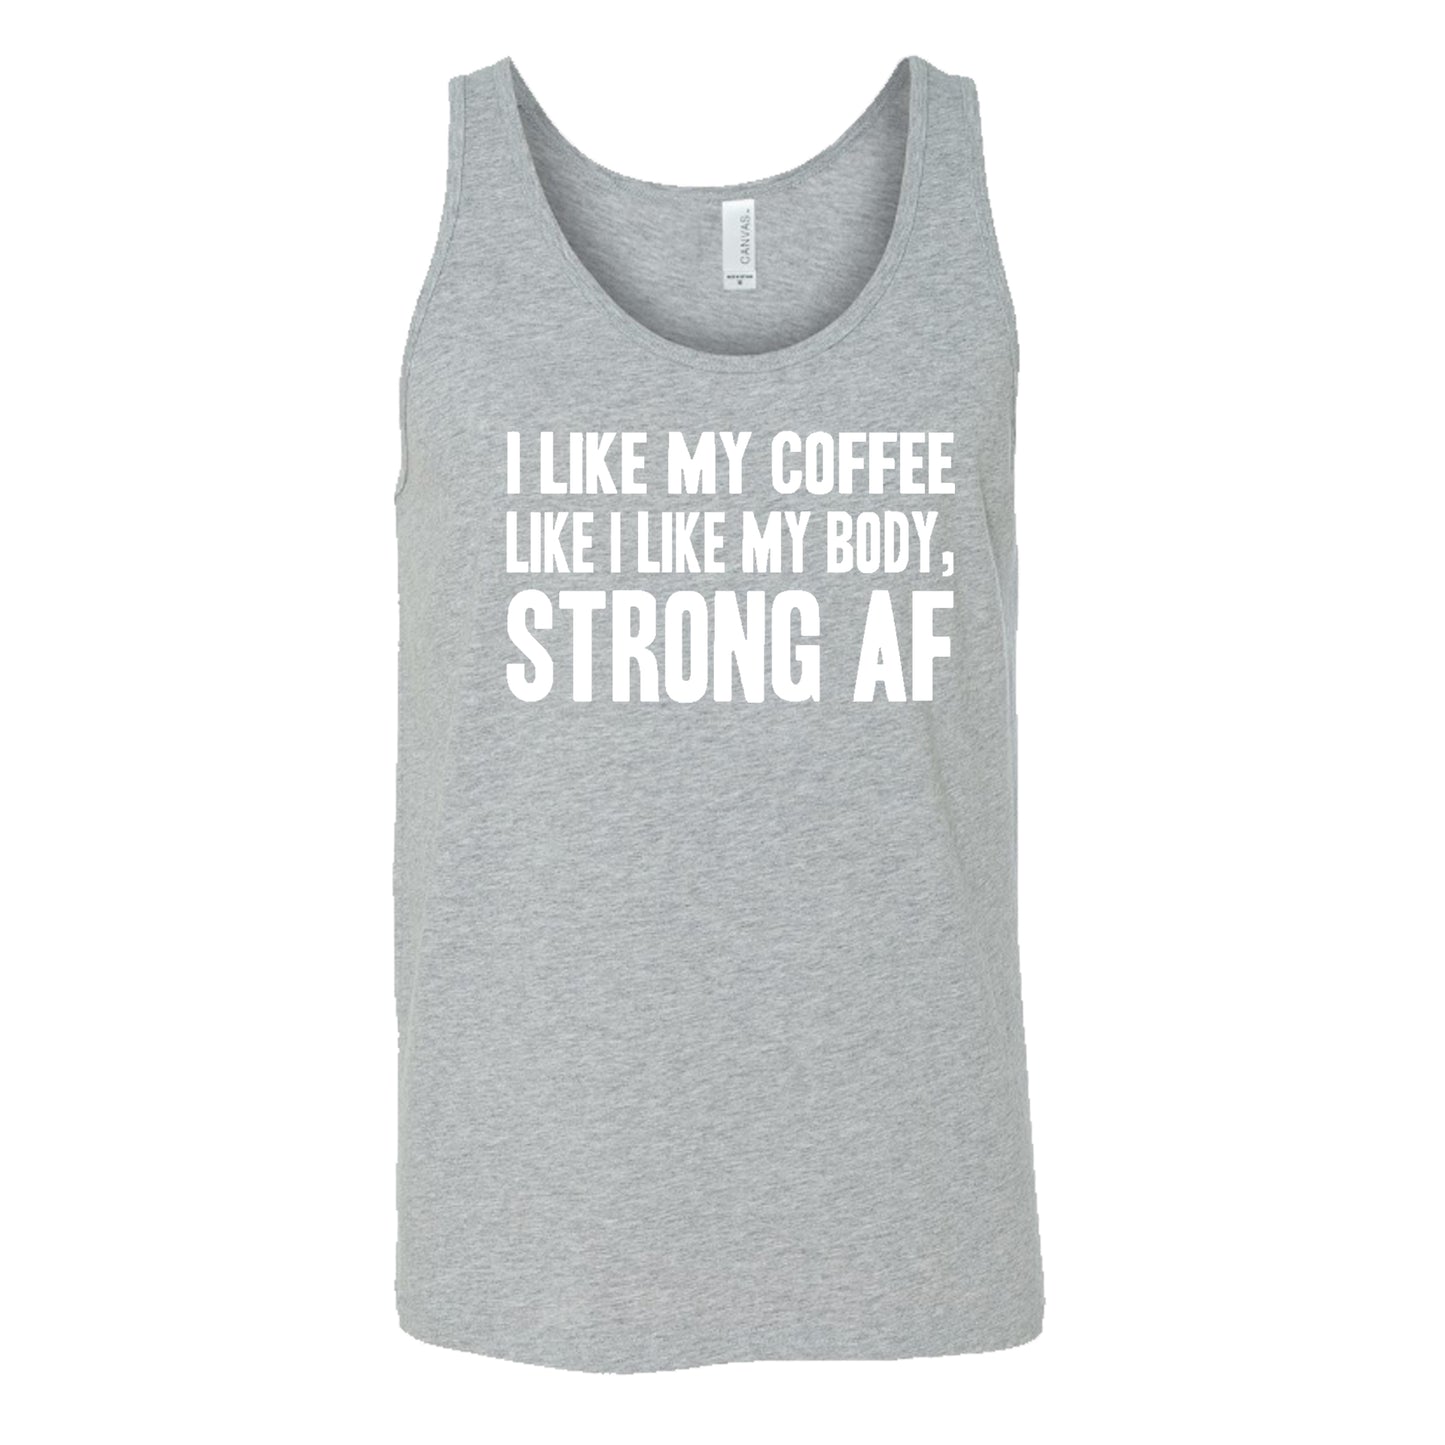 "I Like My Coffee Like I Like My Body Strong AF" quote in white lettering on grey tank